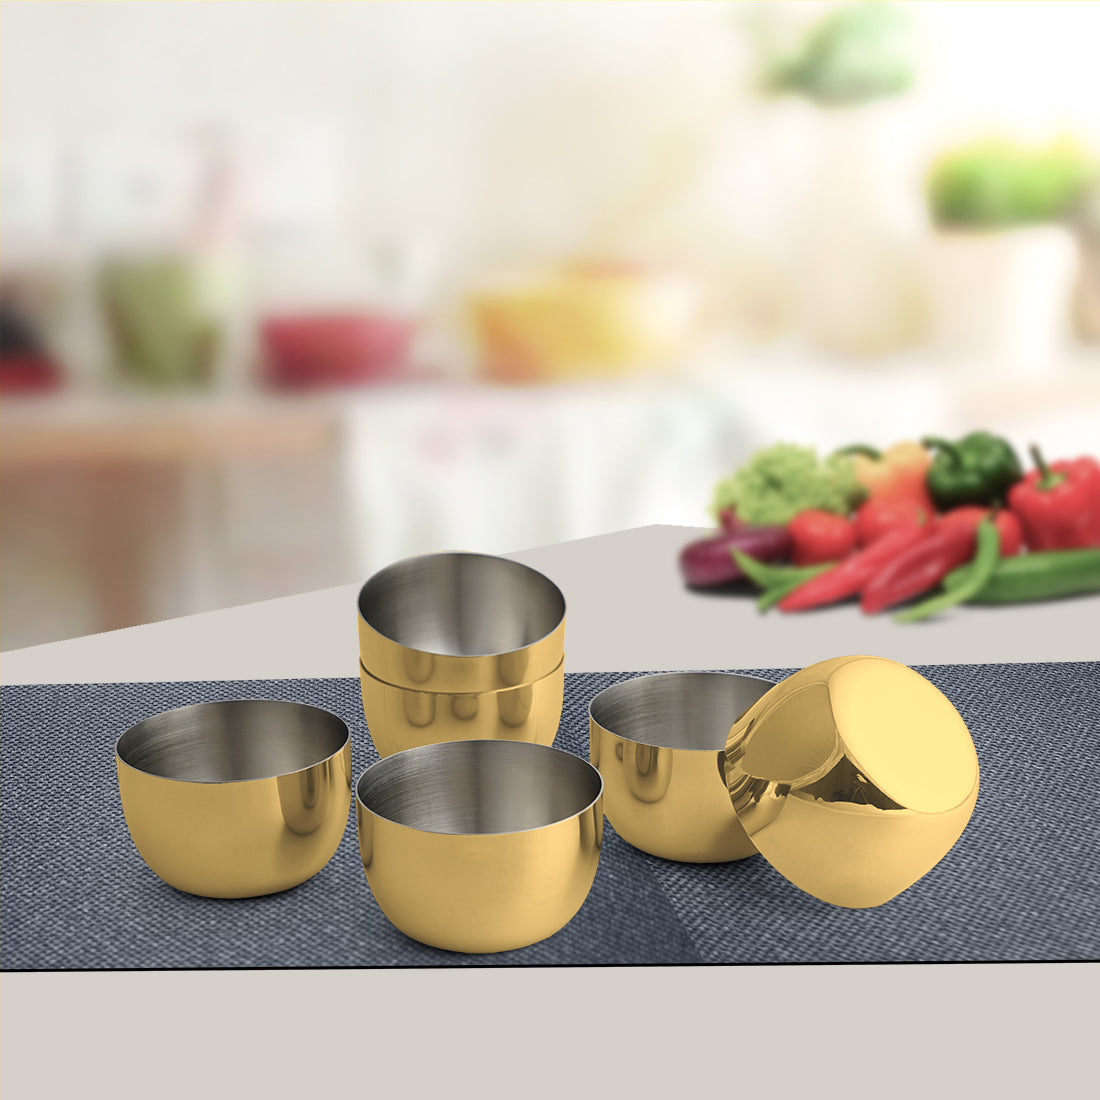 Stainless Steel 6 PCS Small Bowl with Gold PVD Coating Majestic